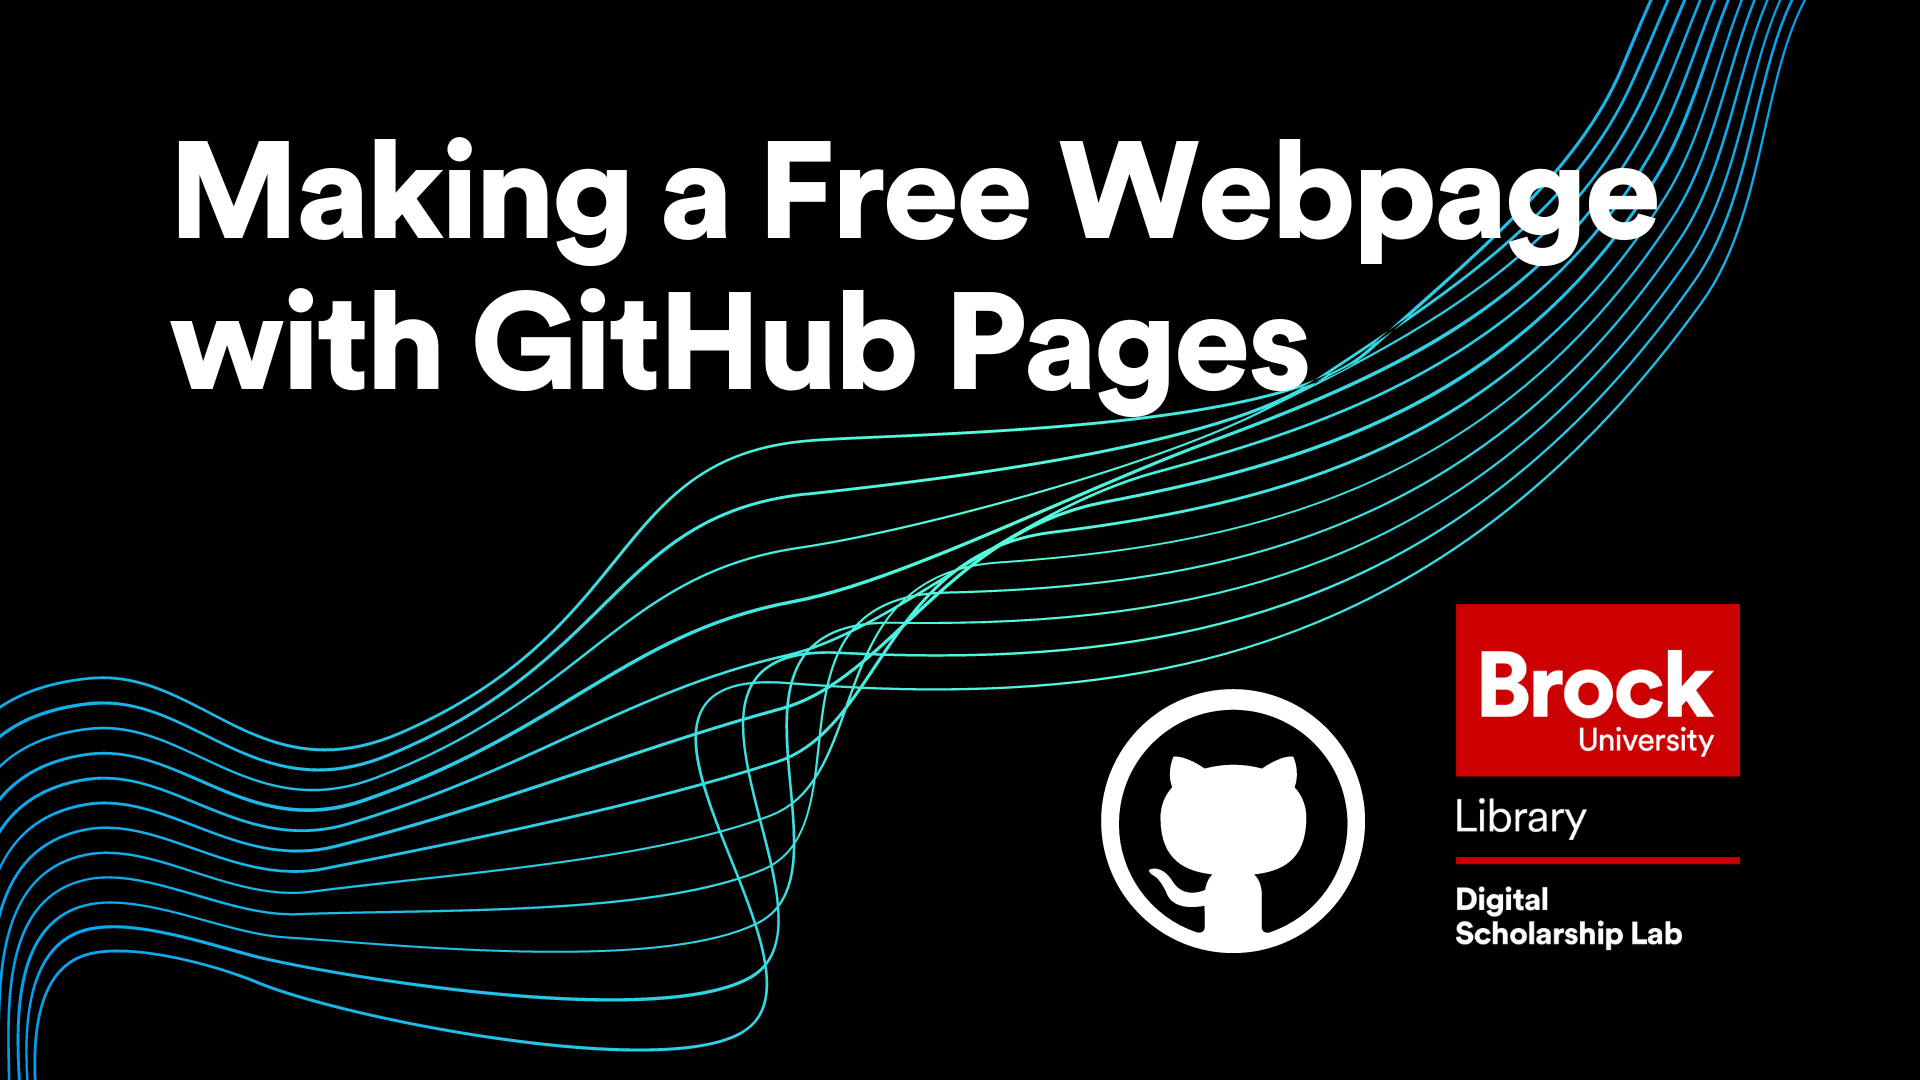 Making a Free Webpage with GitHub Pages